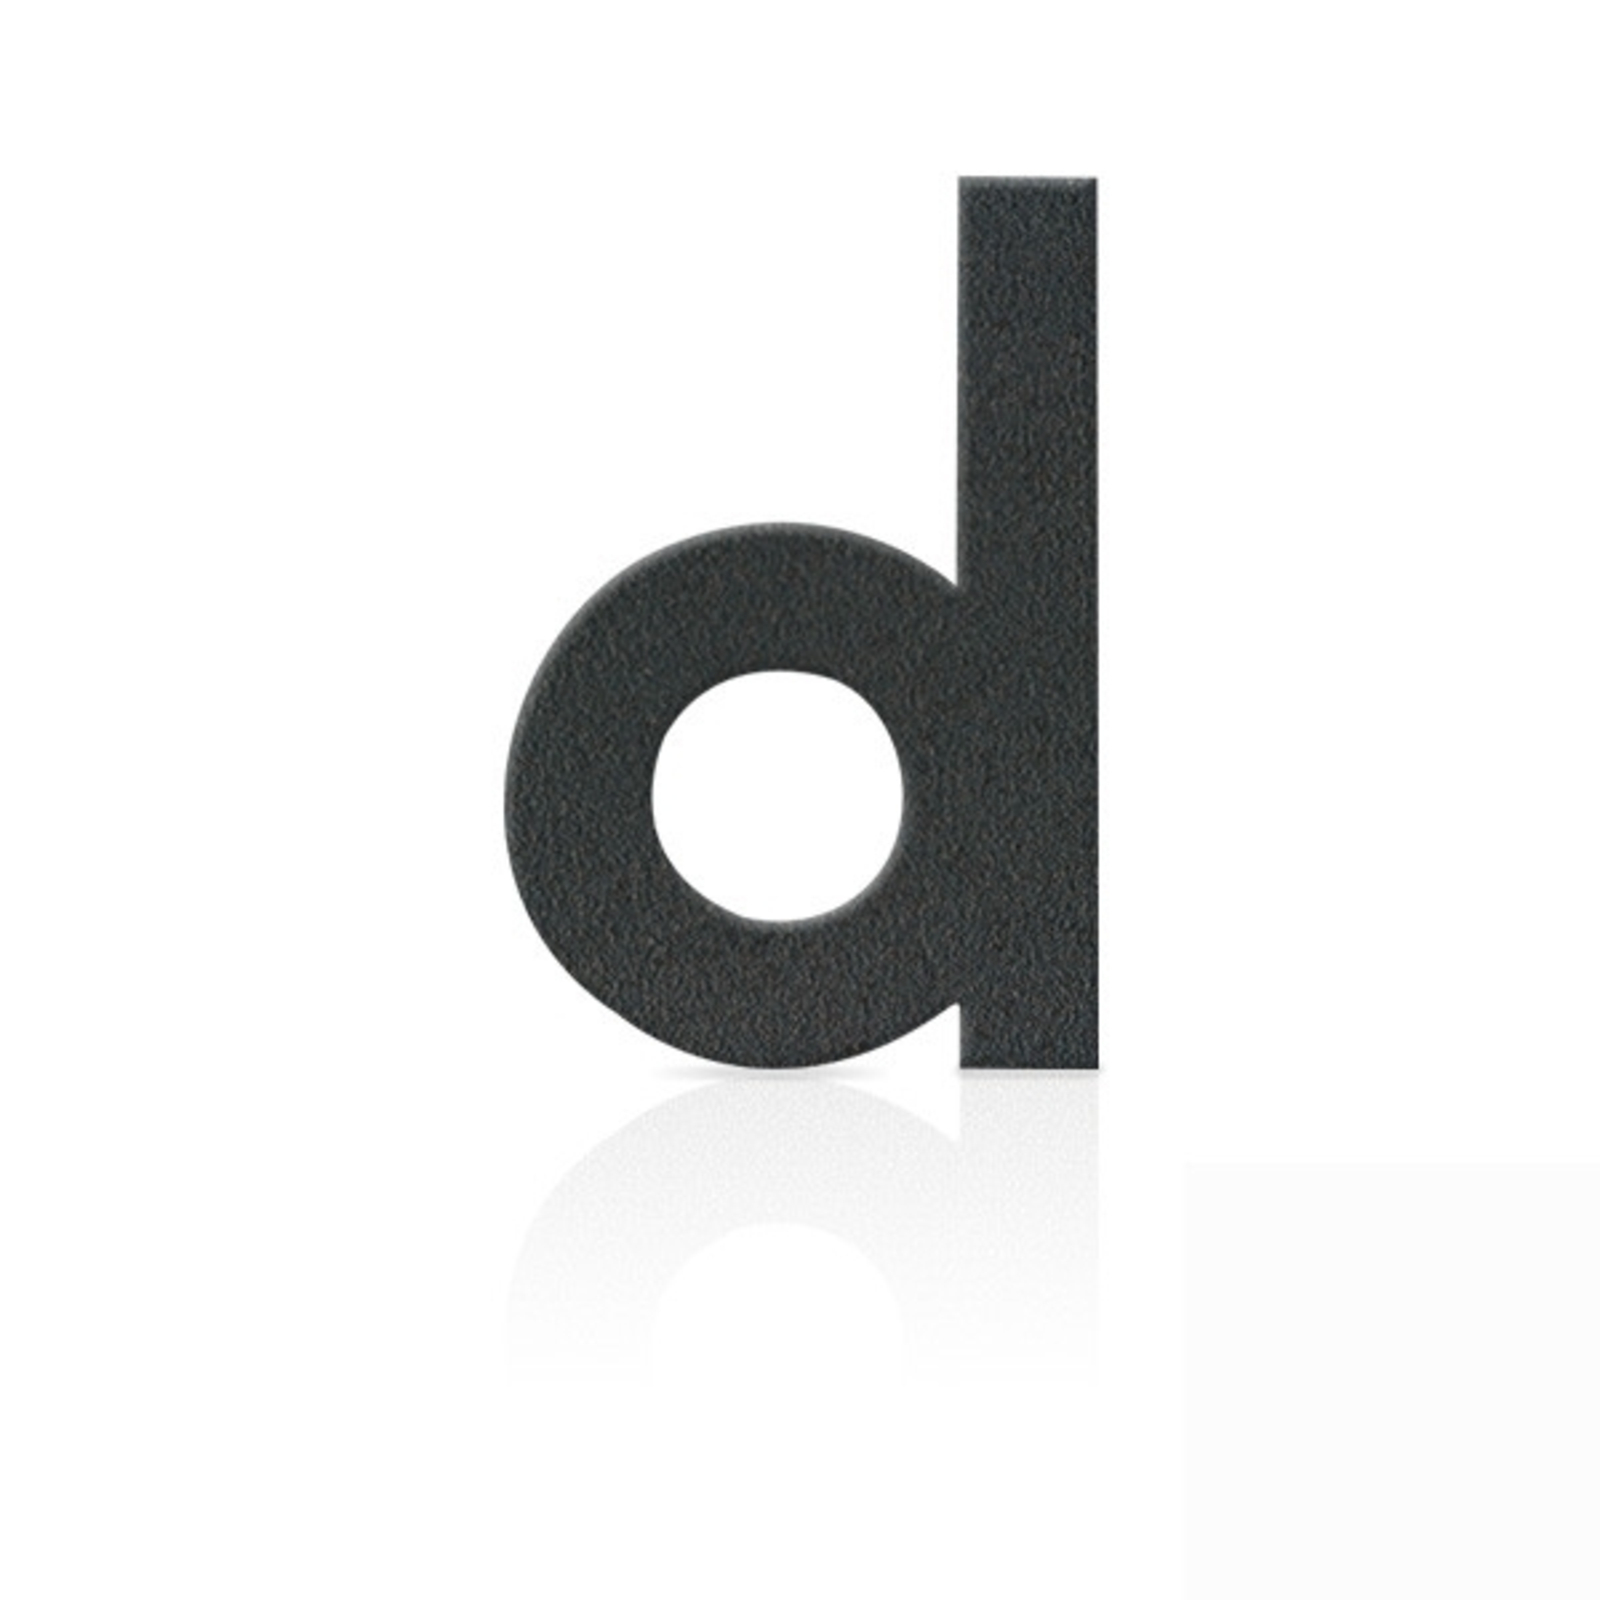 Stainless steel numbers, letter d, graphite grey